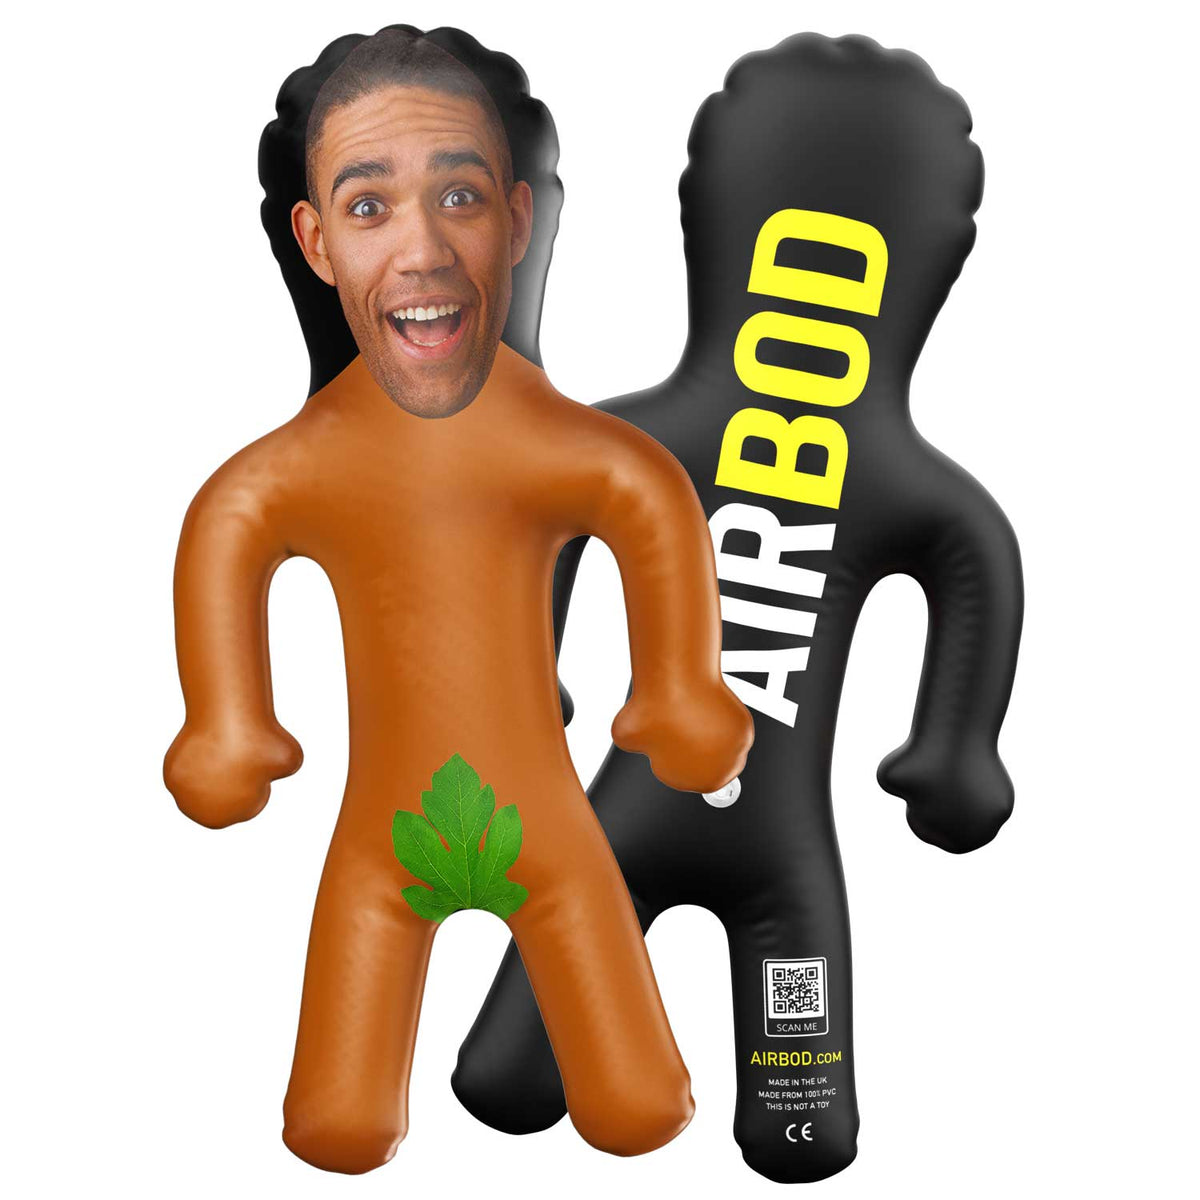 The Male Naturist Blow up Doll